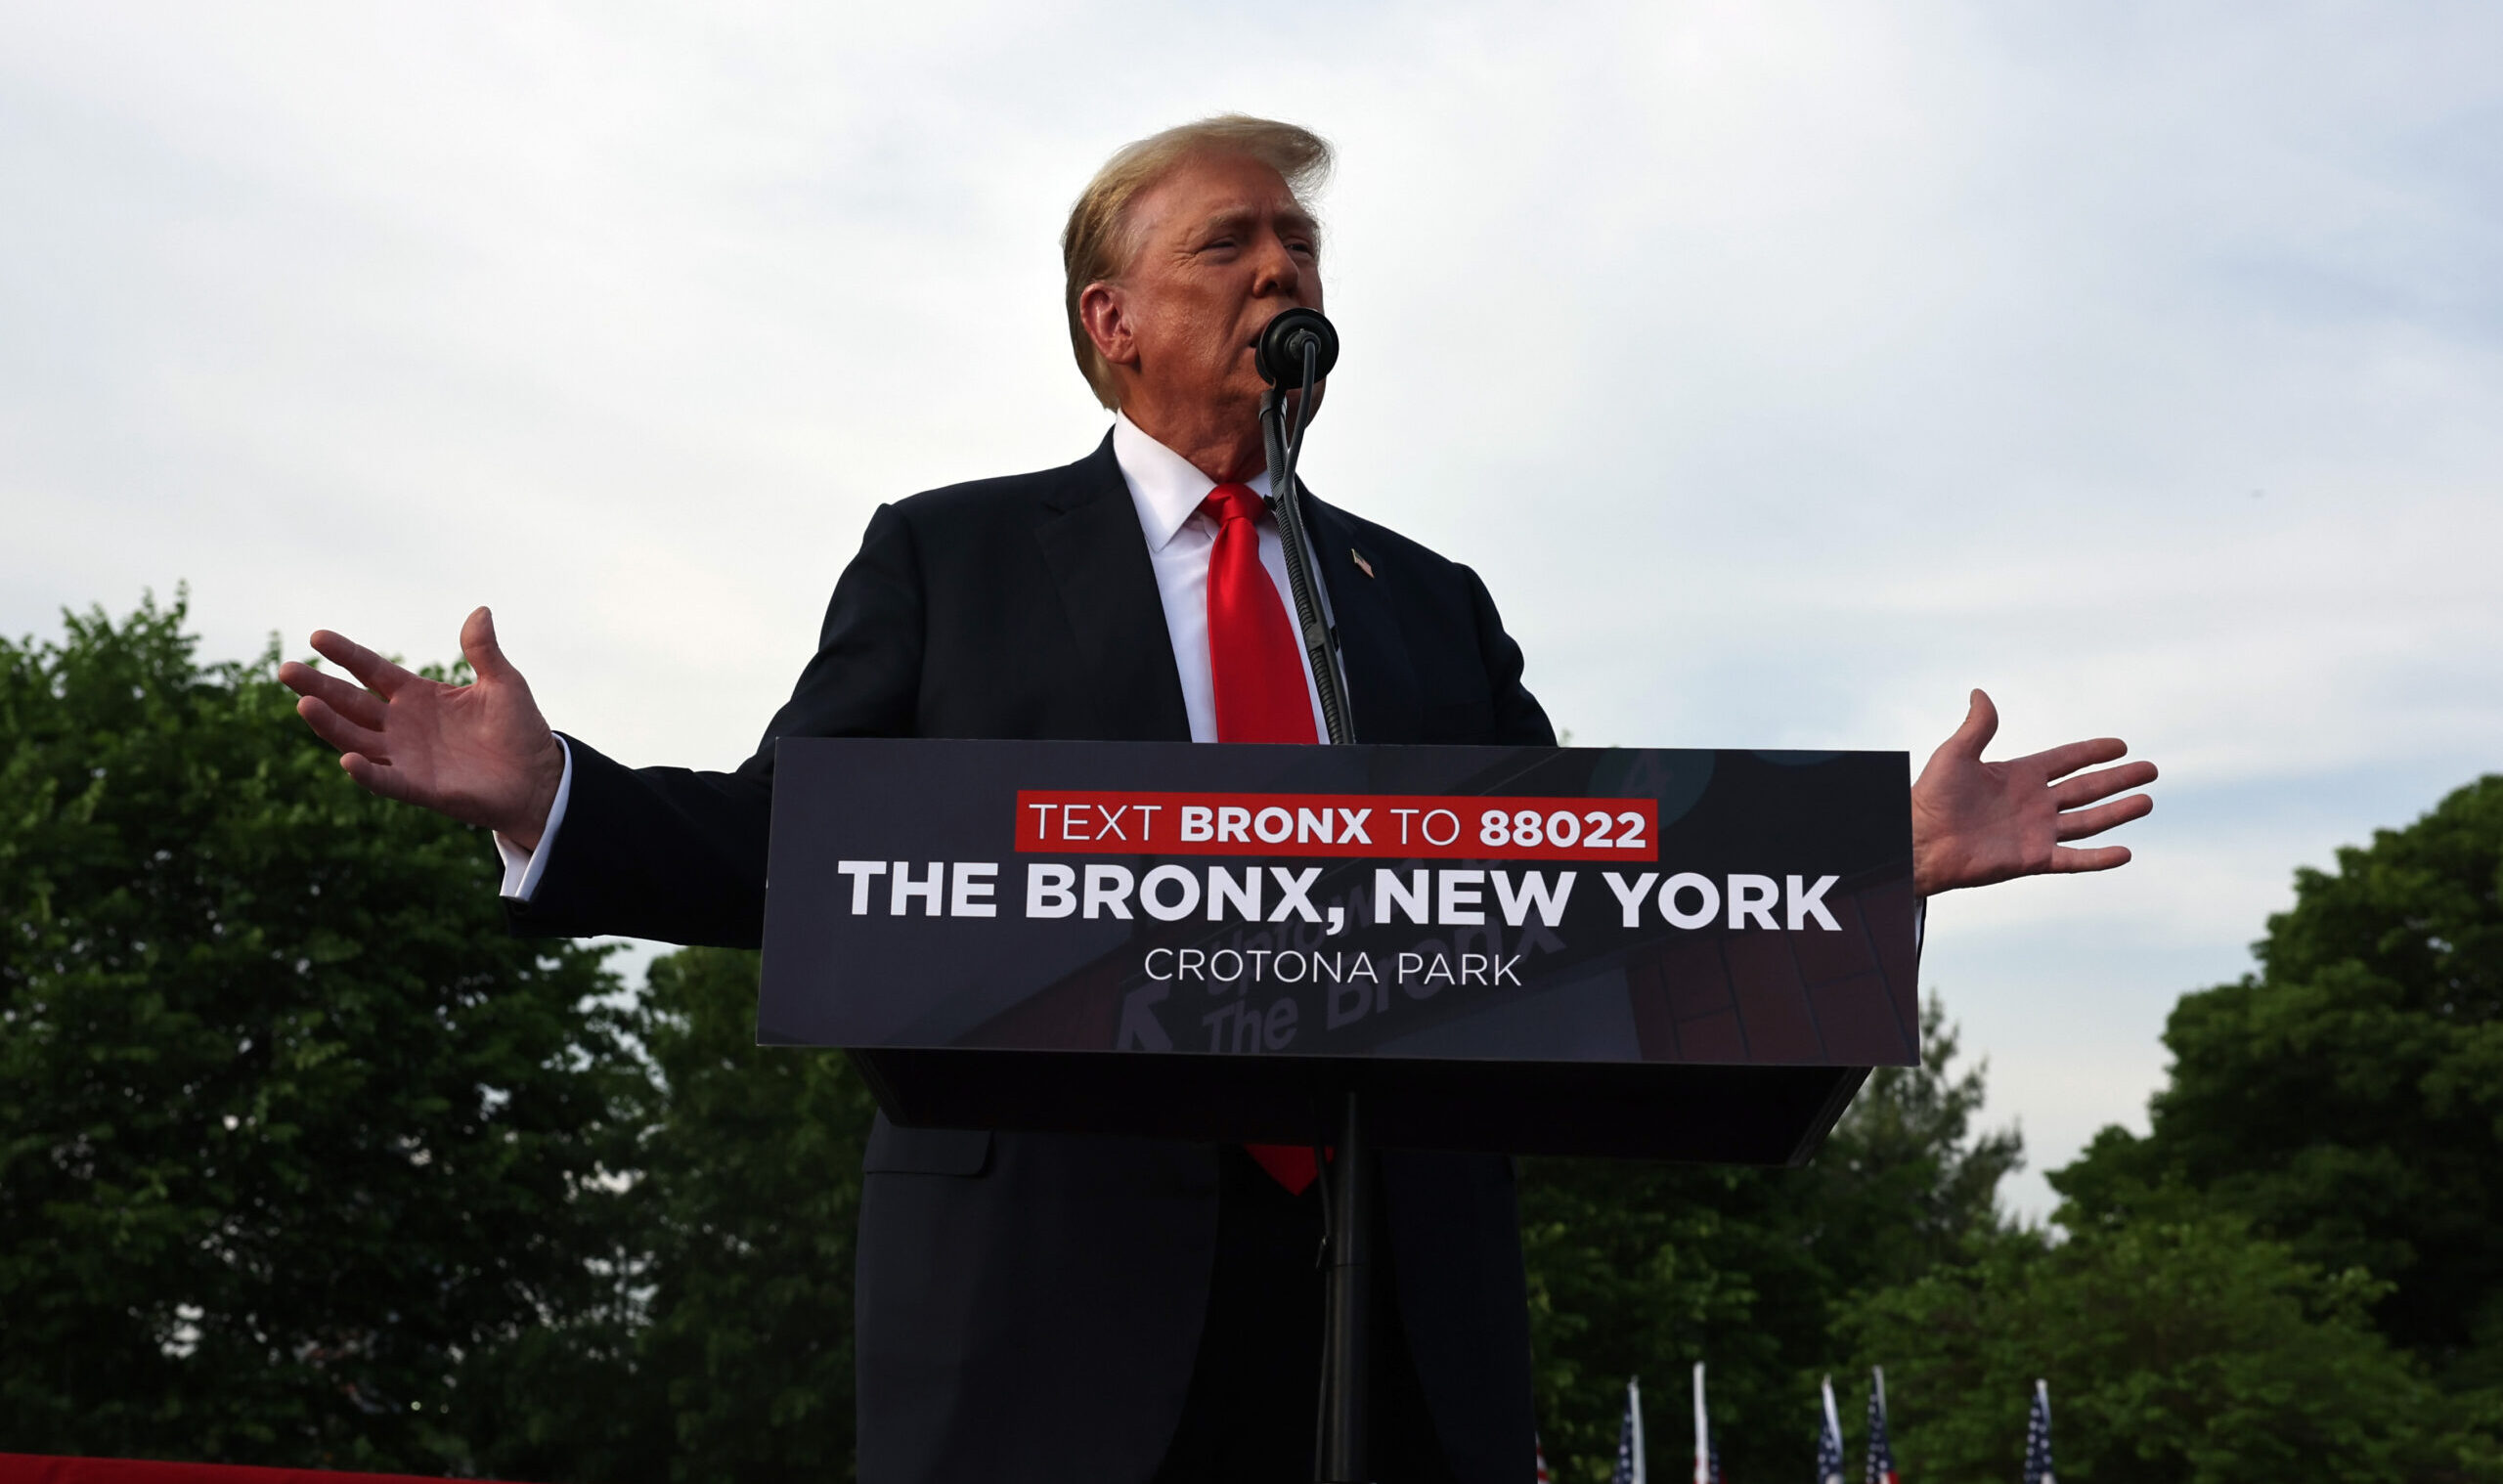 Trump’s Bronx Rally May Show the Future of the GOP